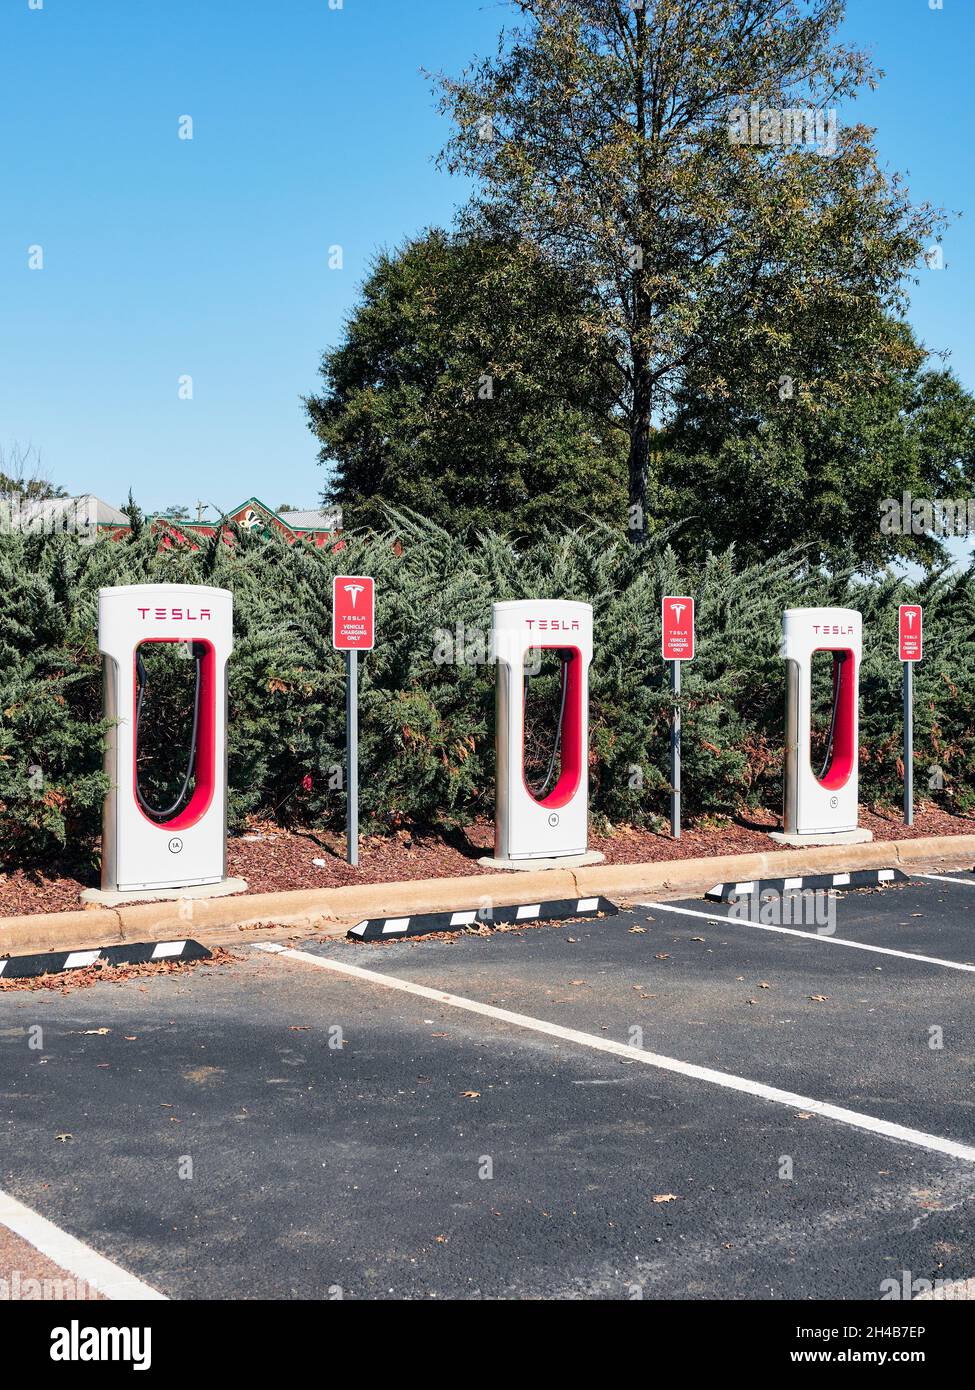 Tesla electric car charging stations for eco friendly cars in a shopping center parking lot in Montgomery Alabama, USA. Stock Photo